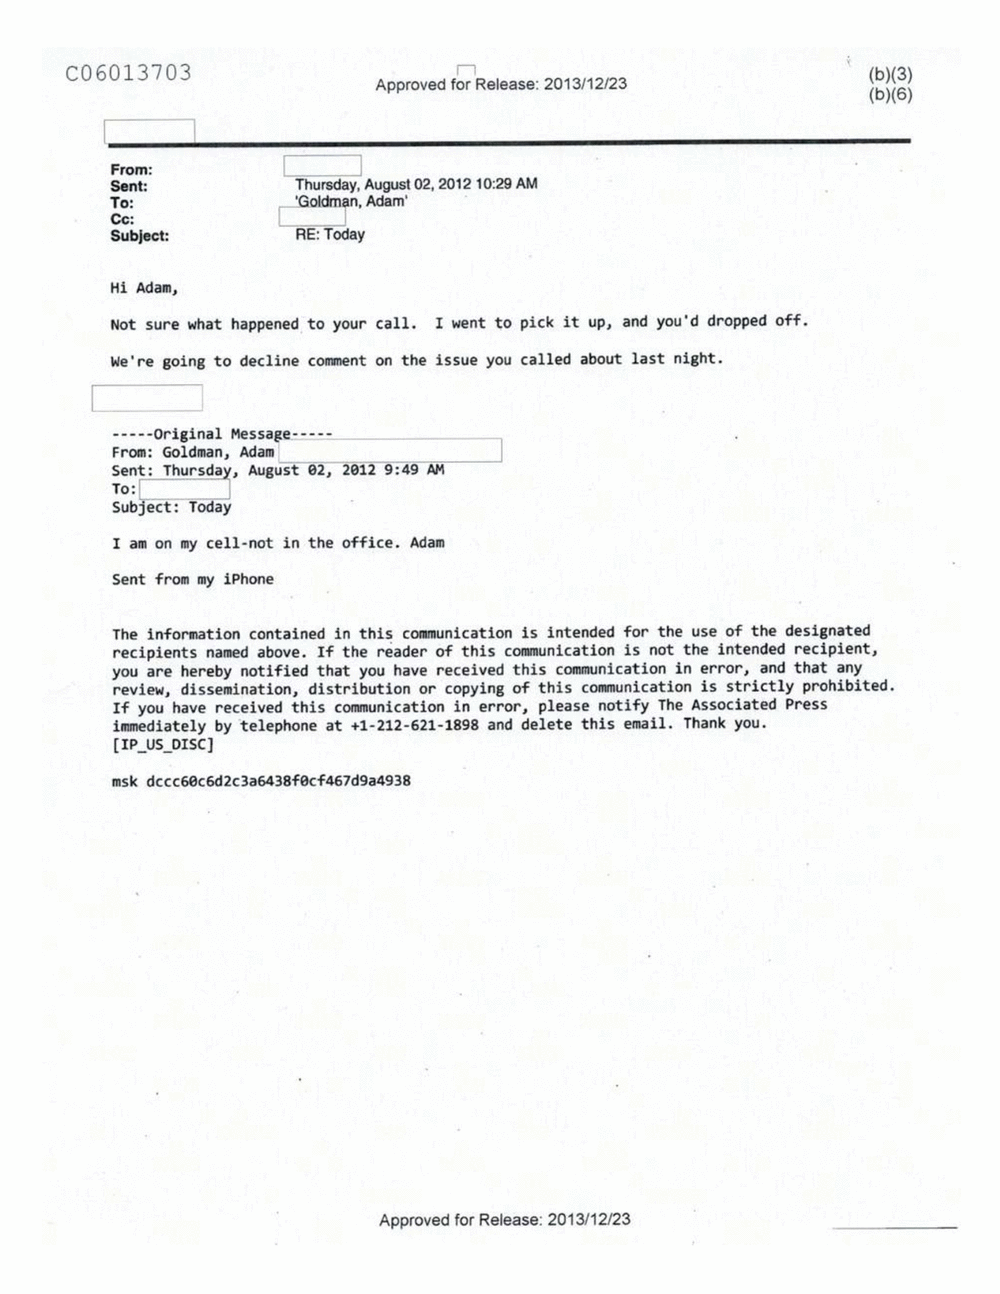 Page 563 from Email Correspondence Between Reporters and CIA Flacks